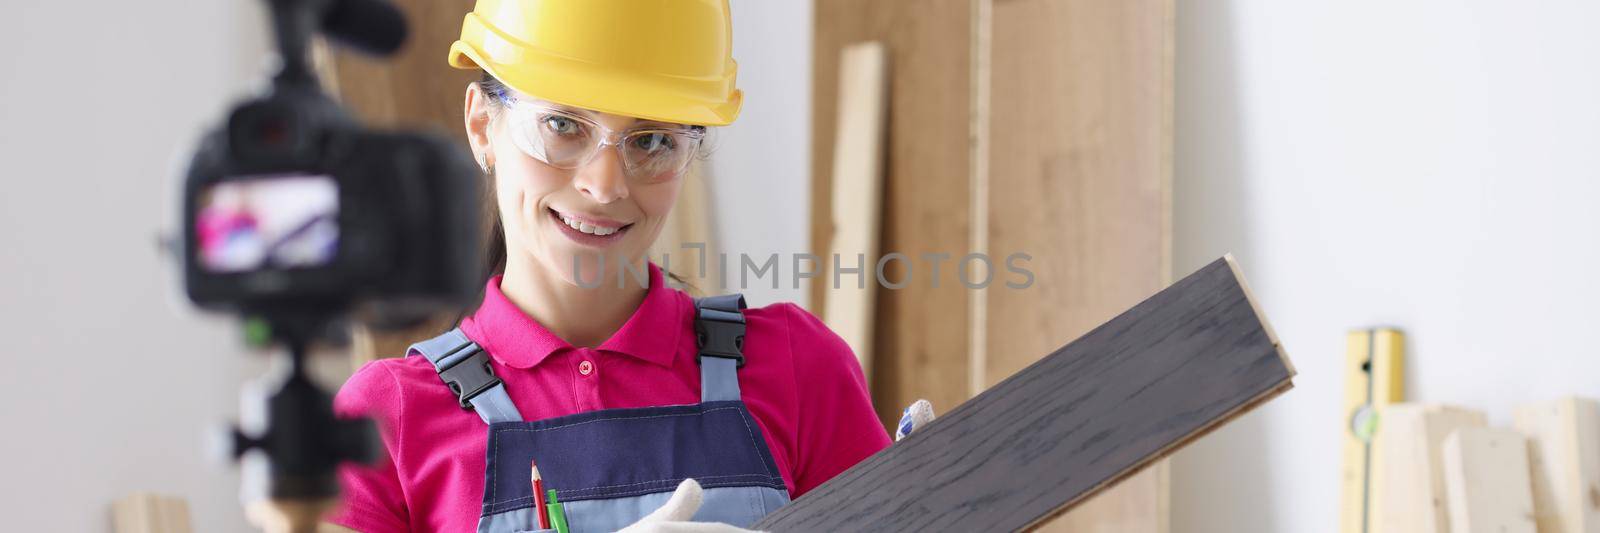 Portrait of professional female worker holding laminate board and showing to camera. Repairer perform construction task, renovation in home. Building blogging and vlogging idea. Redecoration concept